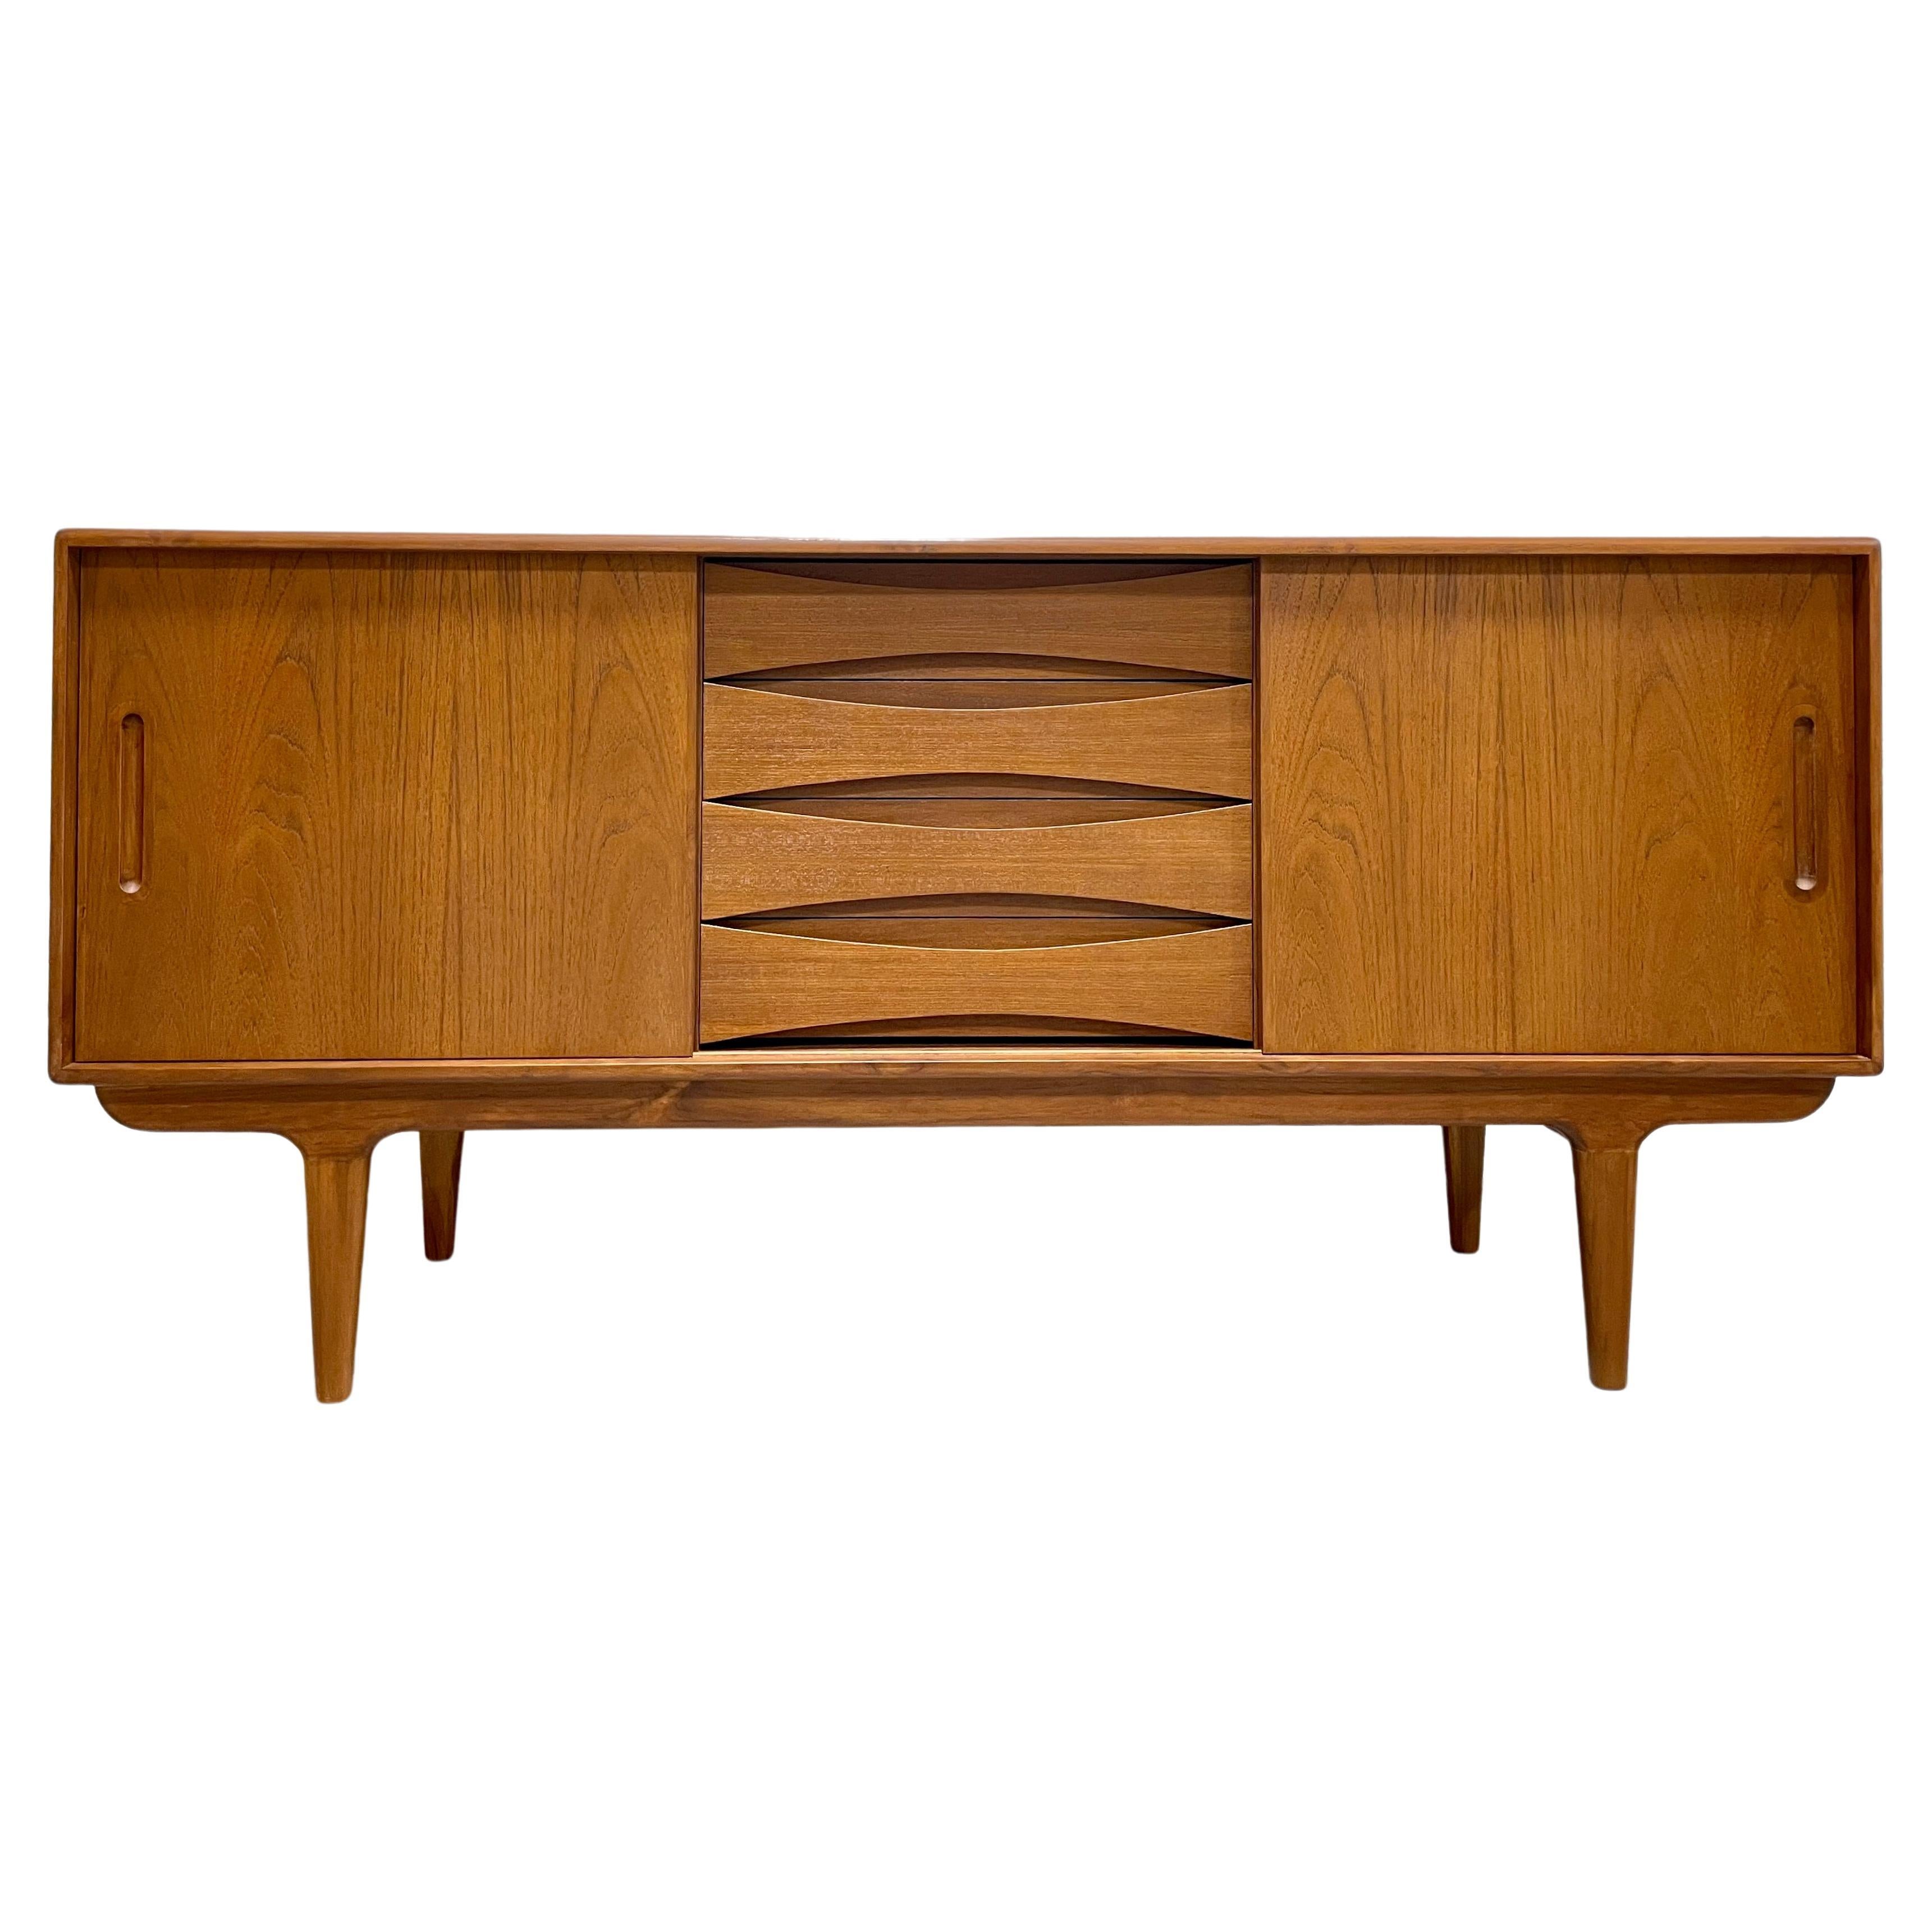 Classic Mid-Century Modern Styled Credenza / Media Stand